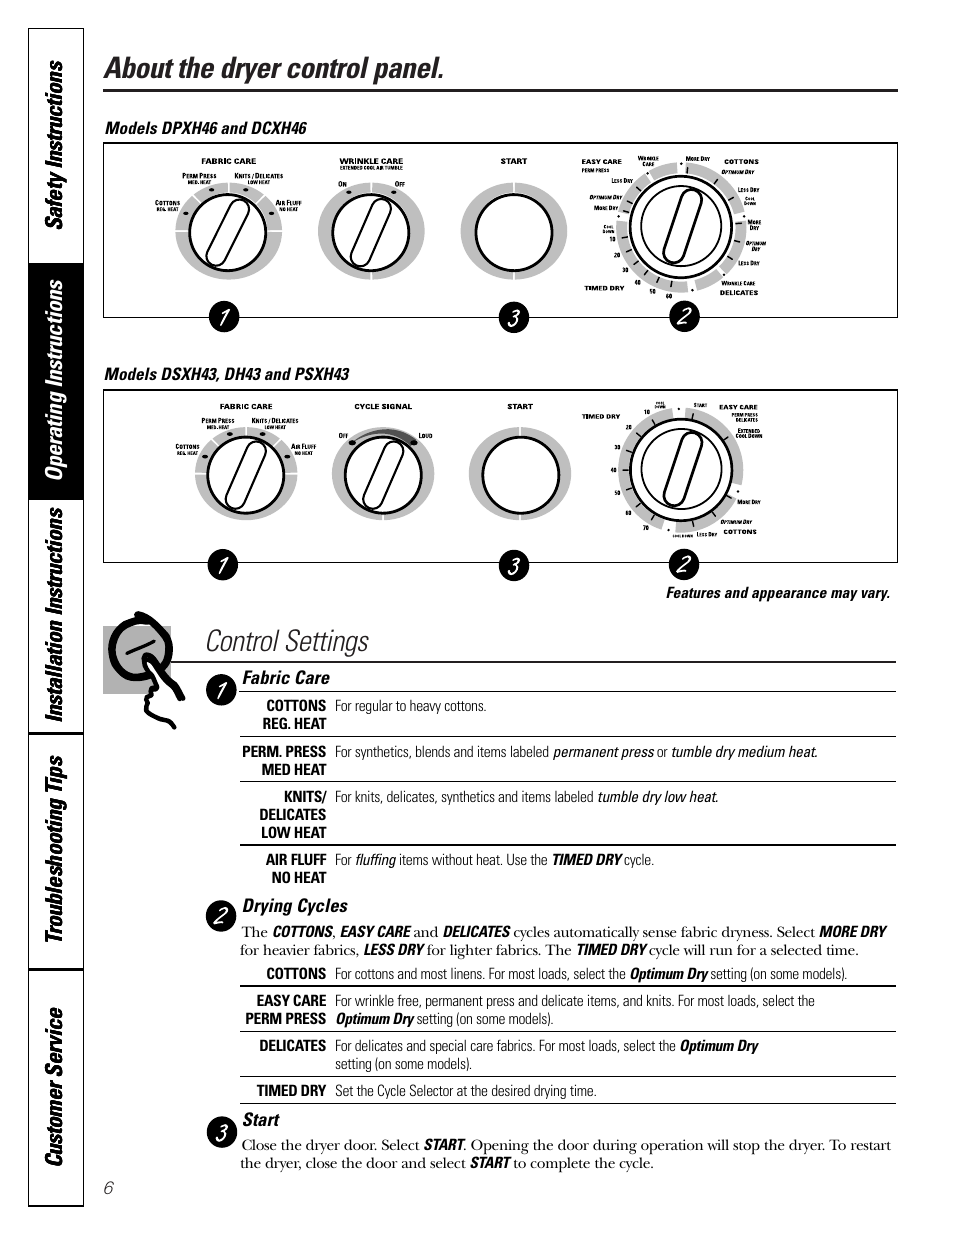 About the dryer control panel. settings | GE DCXH46 Manuel | Page 6 / 52